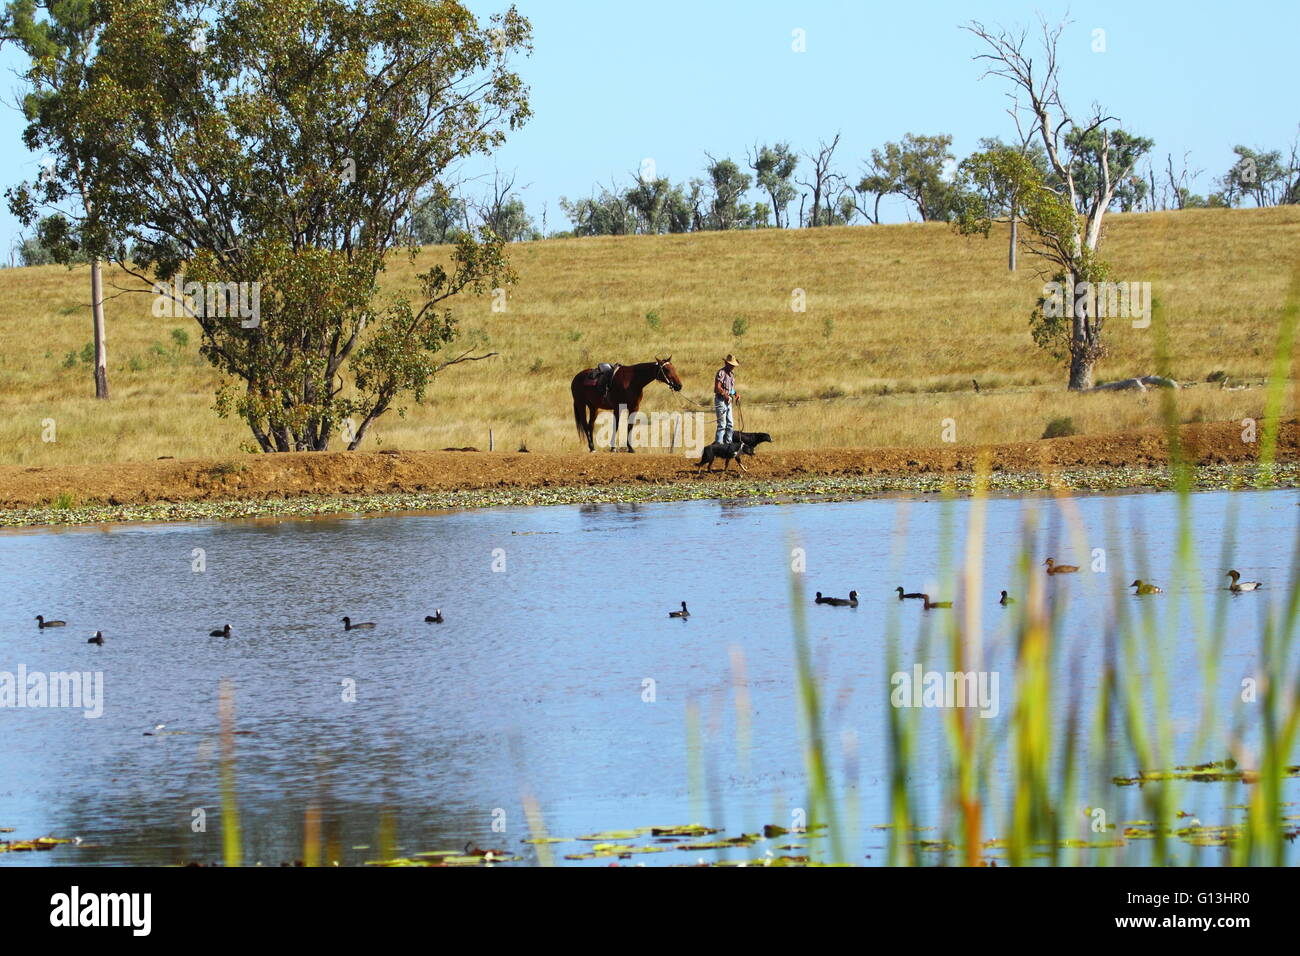 A drover and his two dogs walk alongside a dam on 'Eidsvold Station' near Eidsvold, Queensland, Australia during a cattle drive. Stock Photo